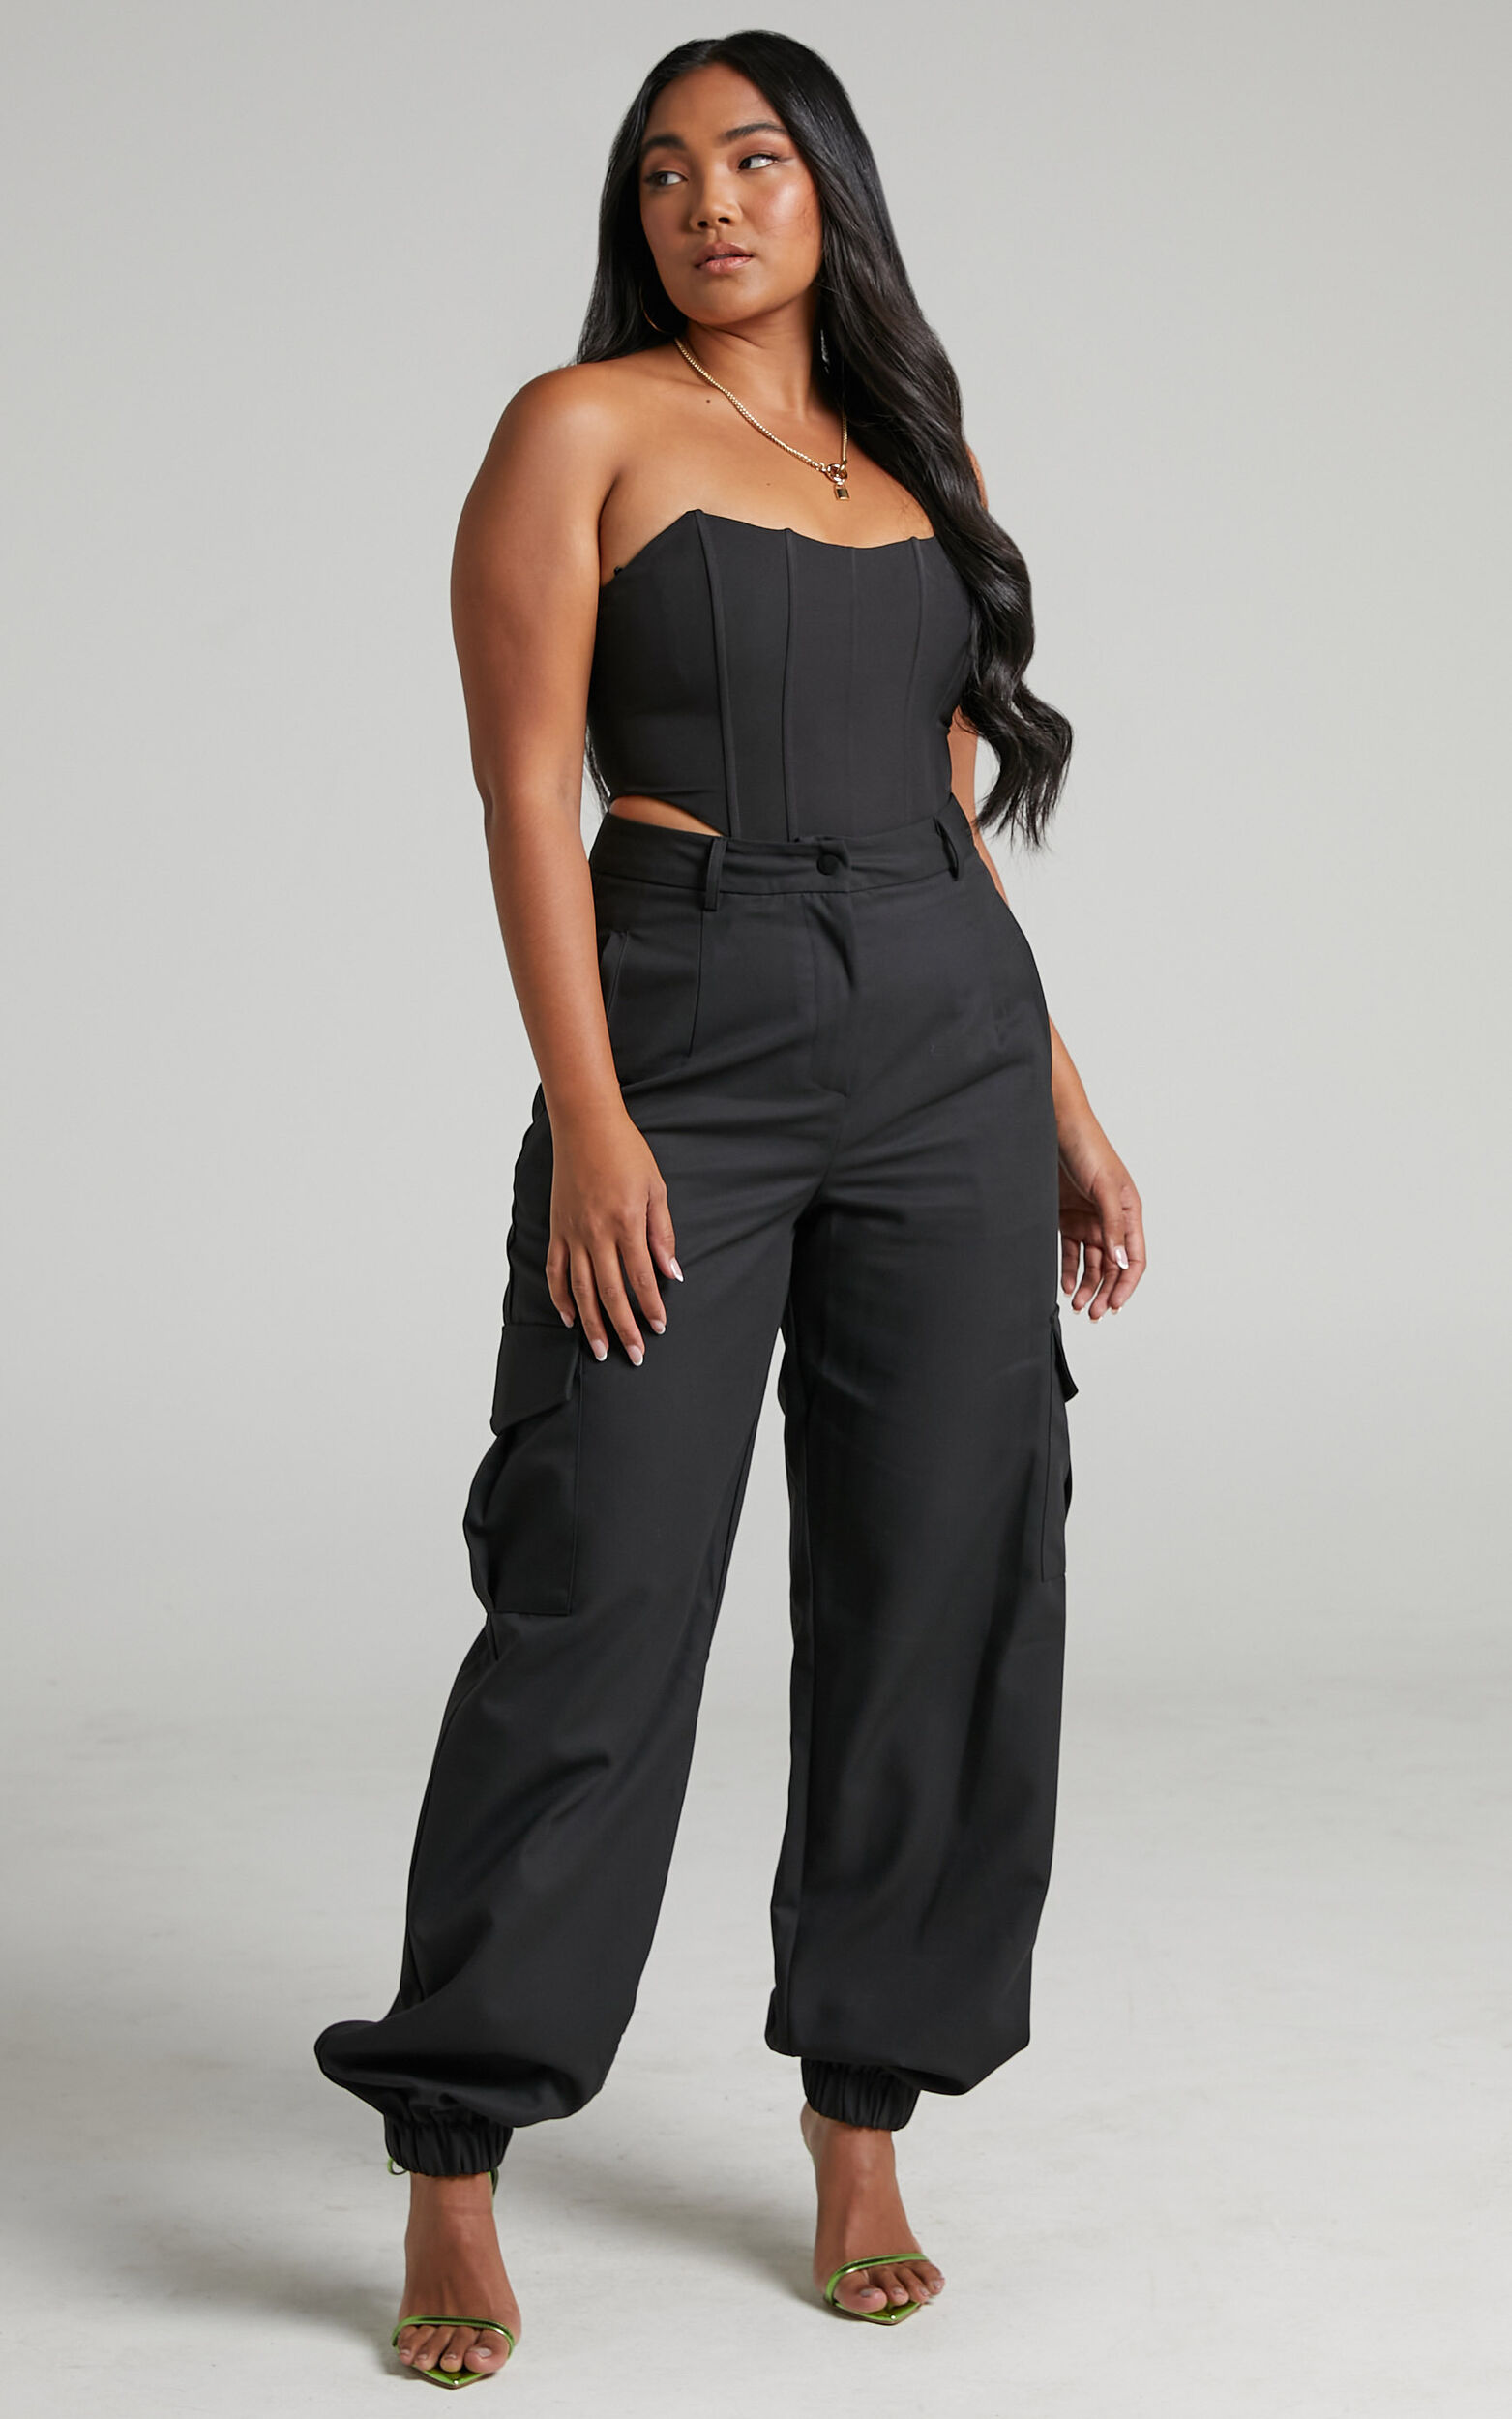 Xyriel - High Waisted Utility Style Cargo Pants in Black - 04, BLK1